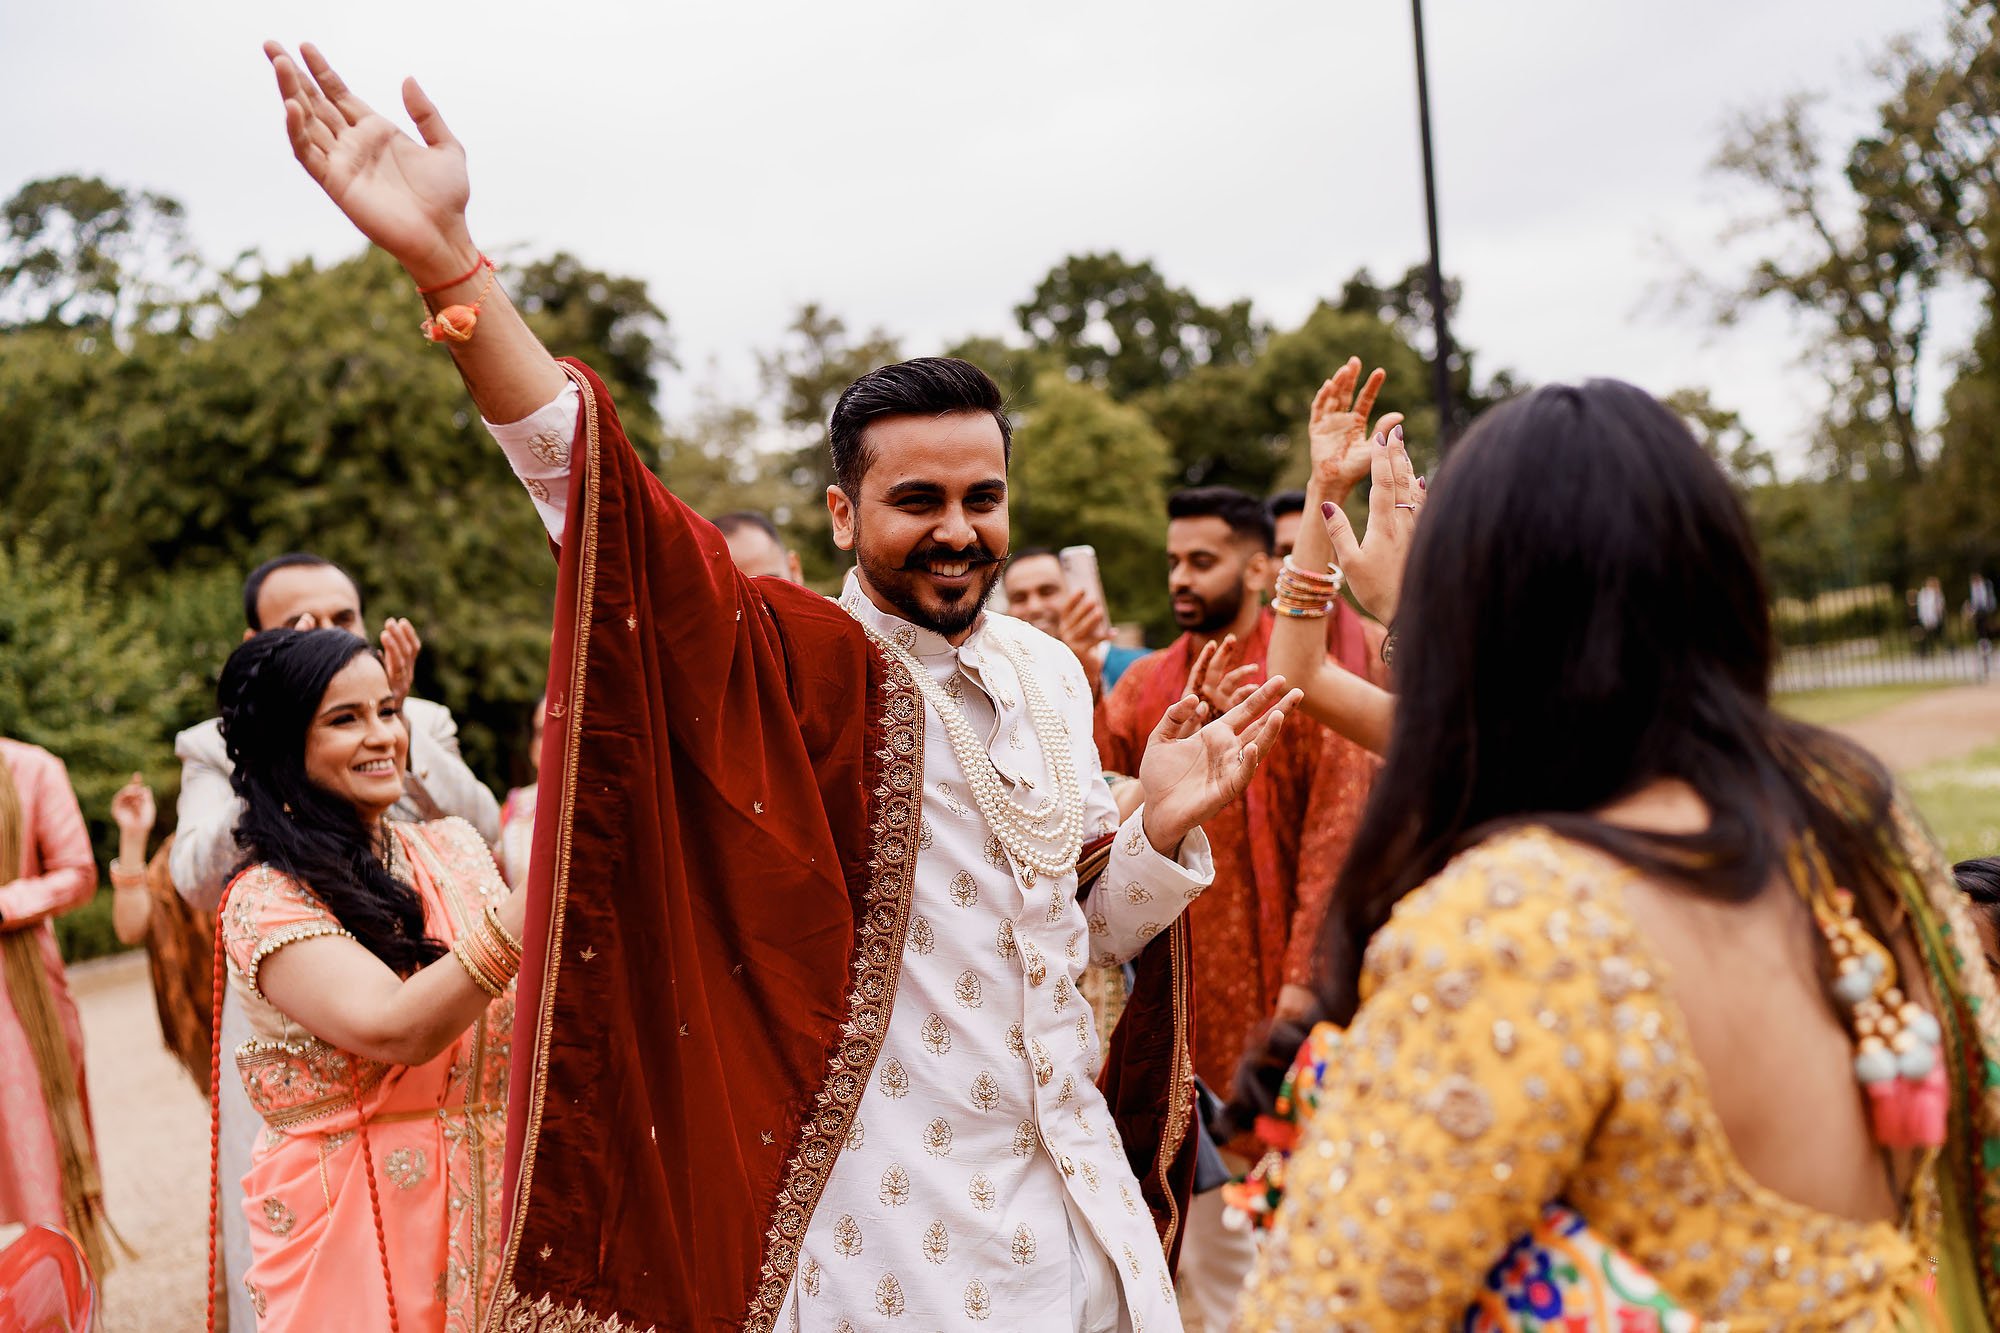 Amazing indian wedding photography at winstanley house leicester